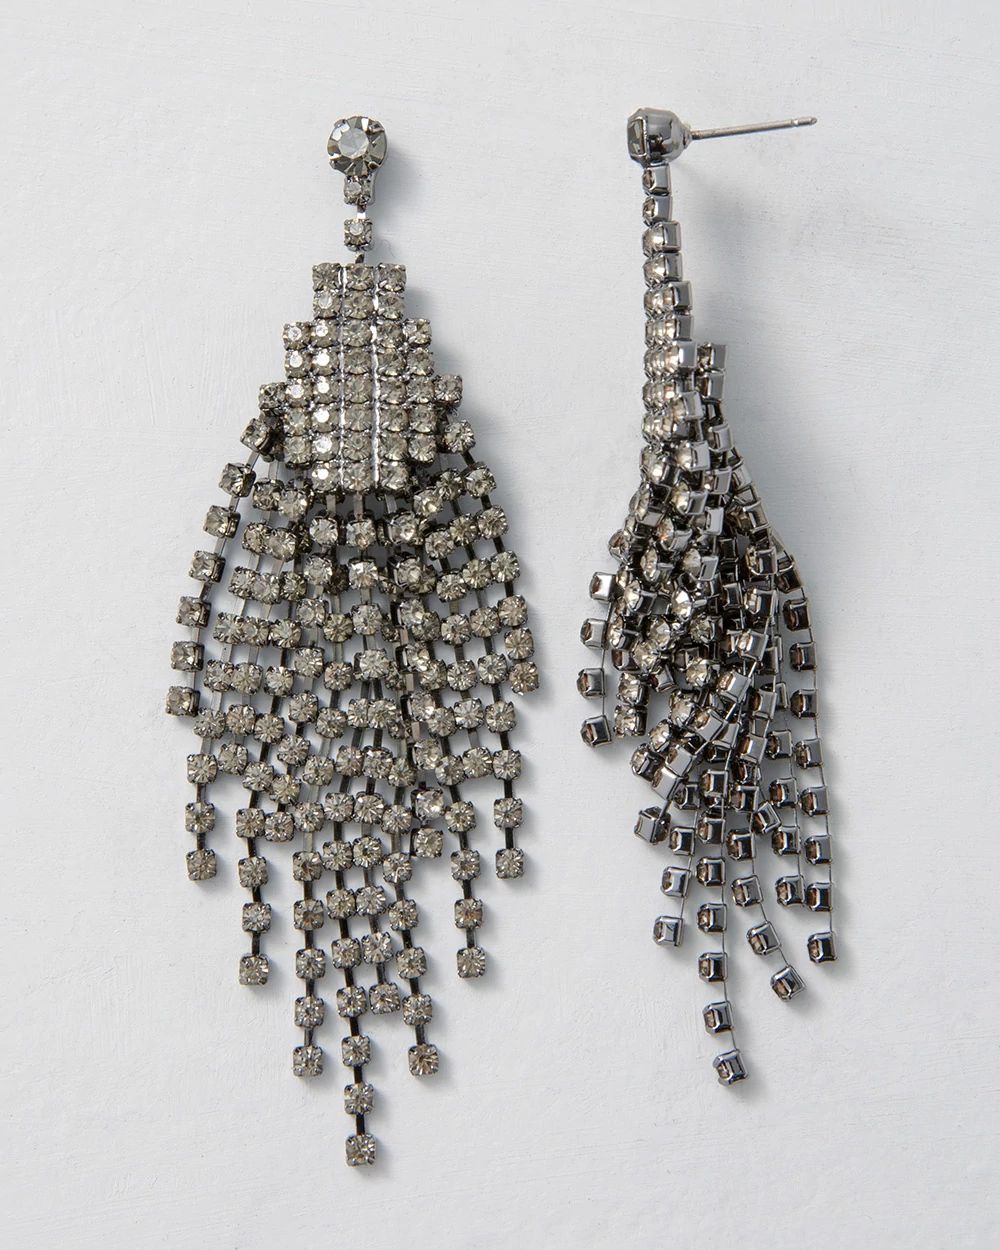 Hematite Fringe Chandelier Earrings click to view larger image.